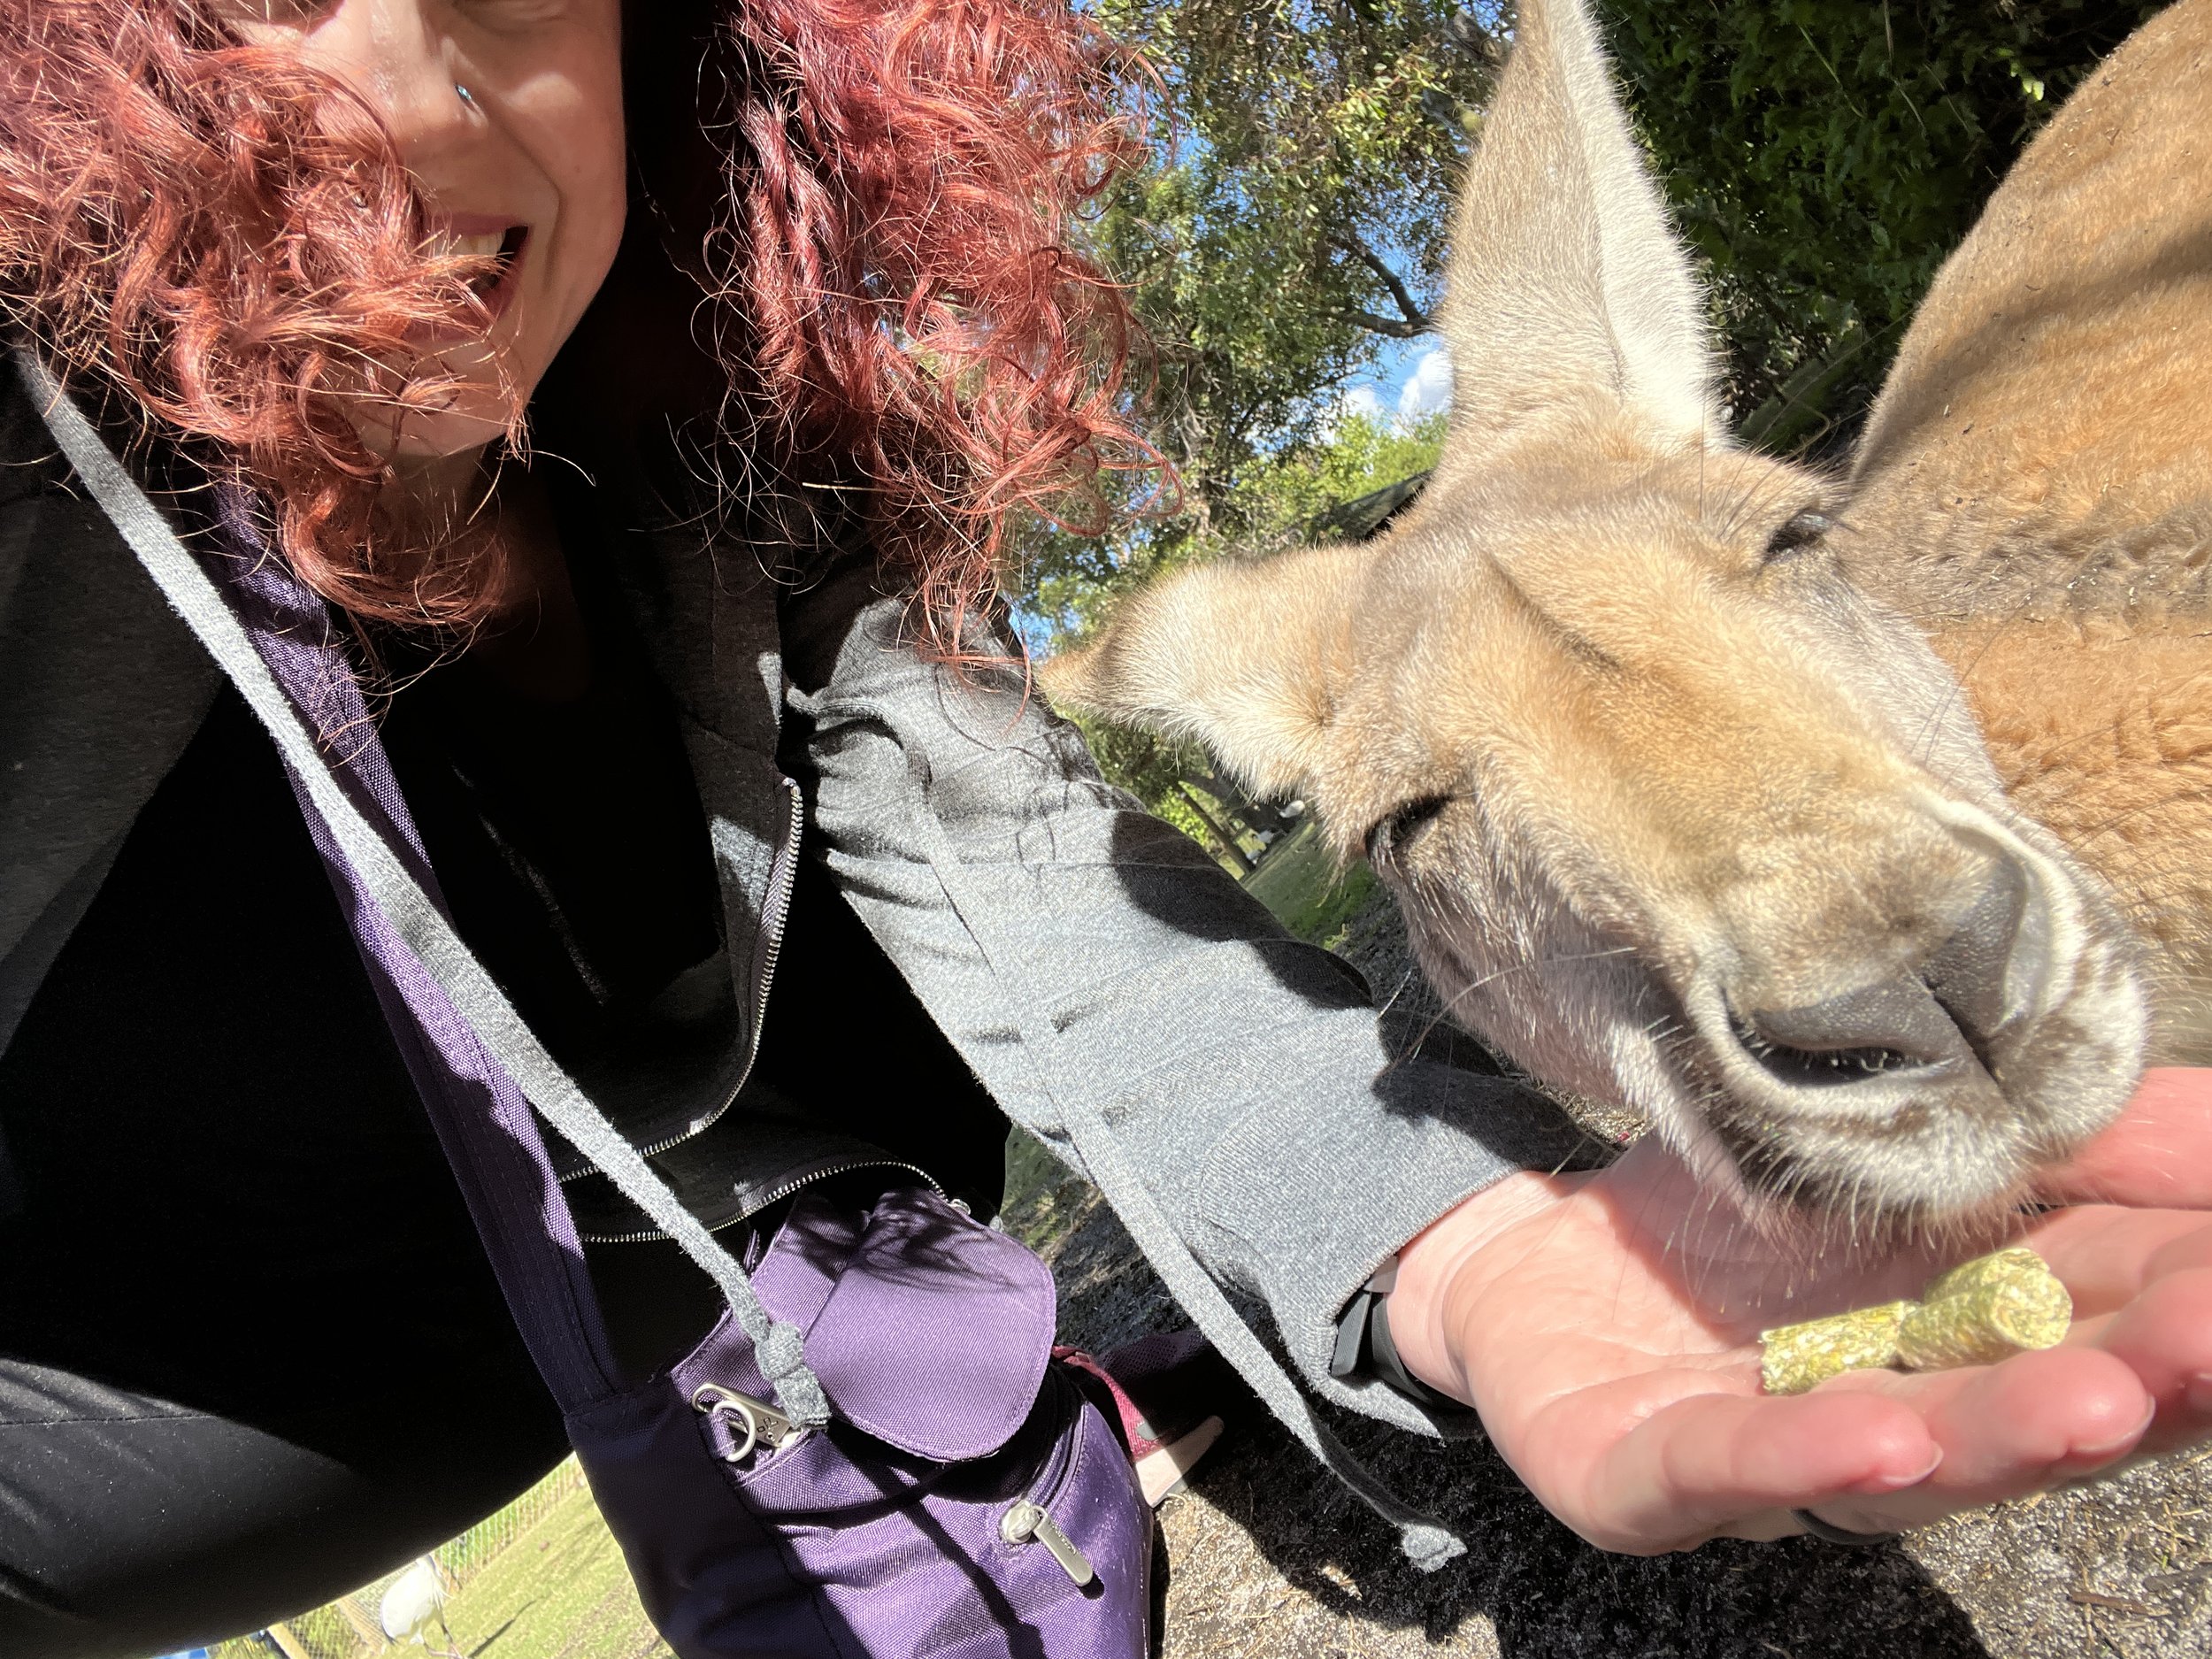 Getting a roo selfie is challenging!